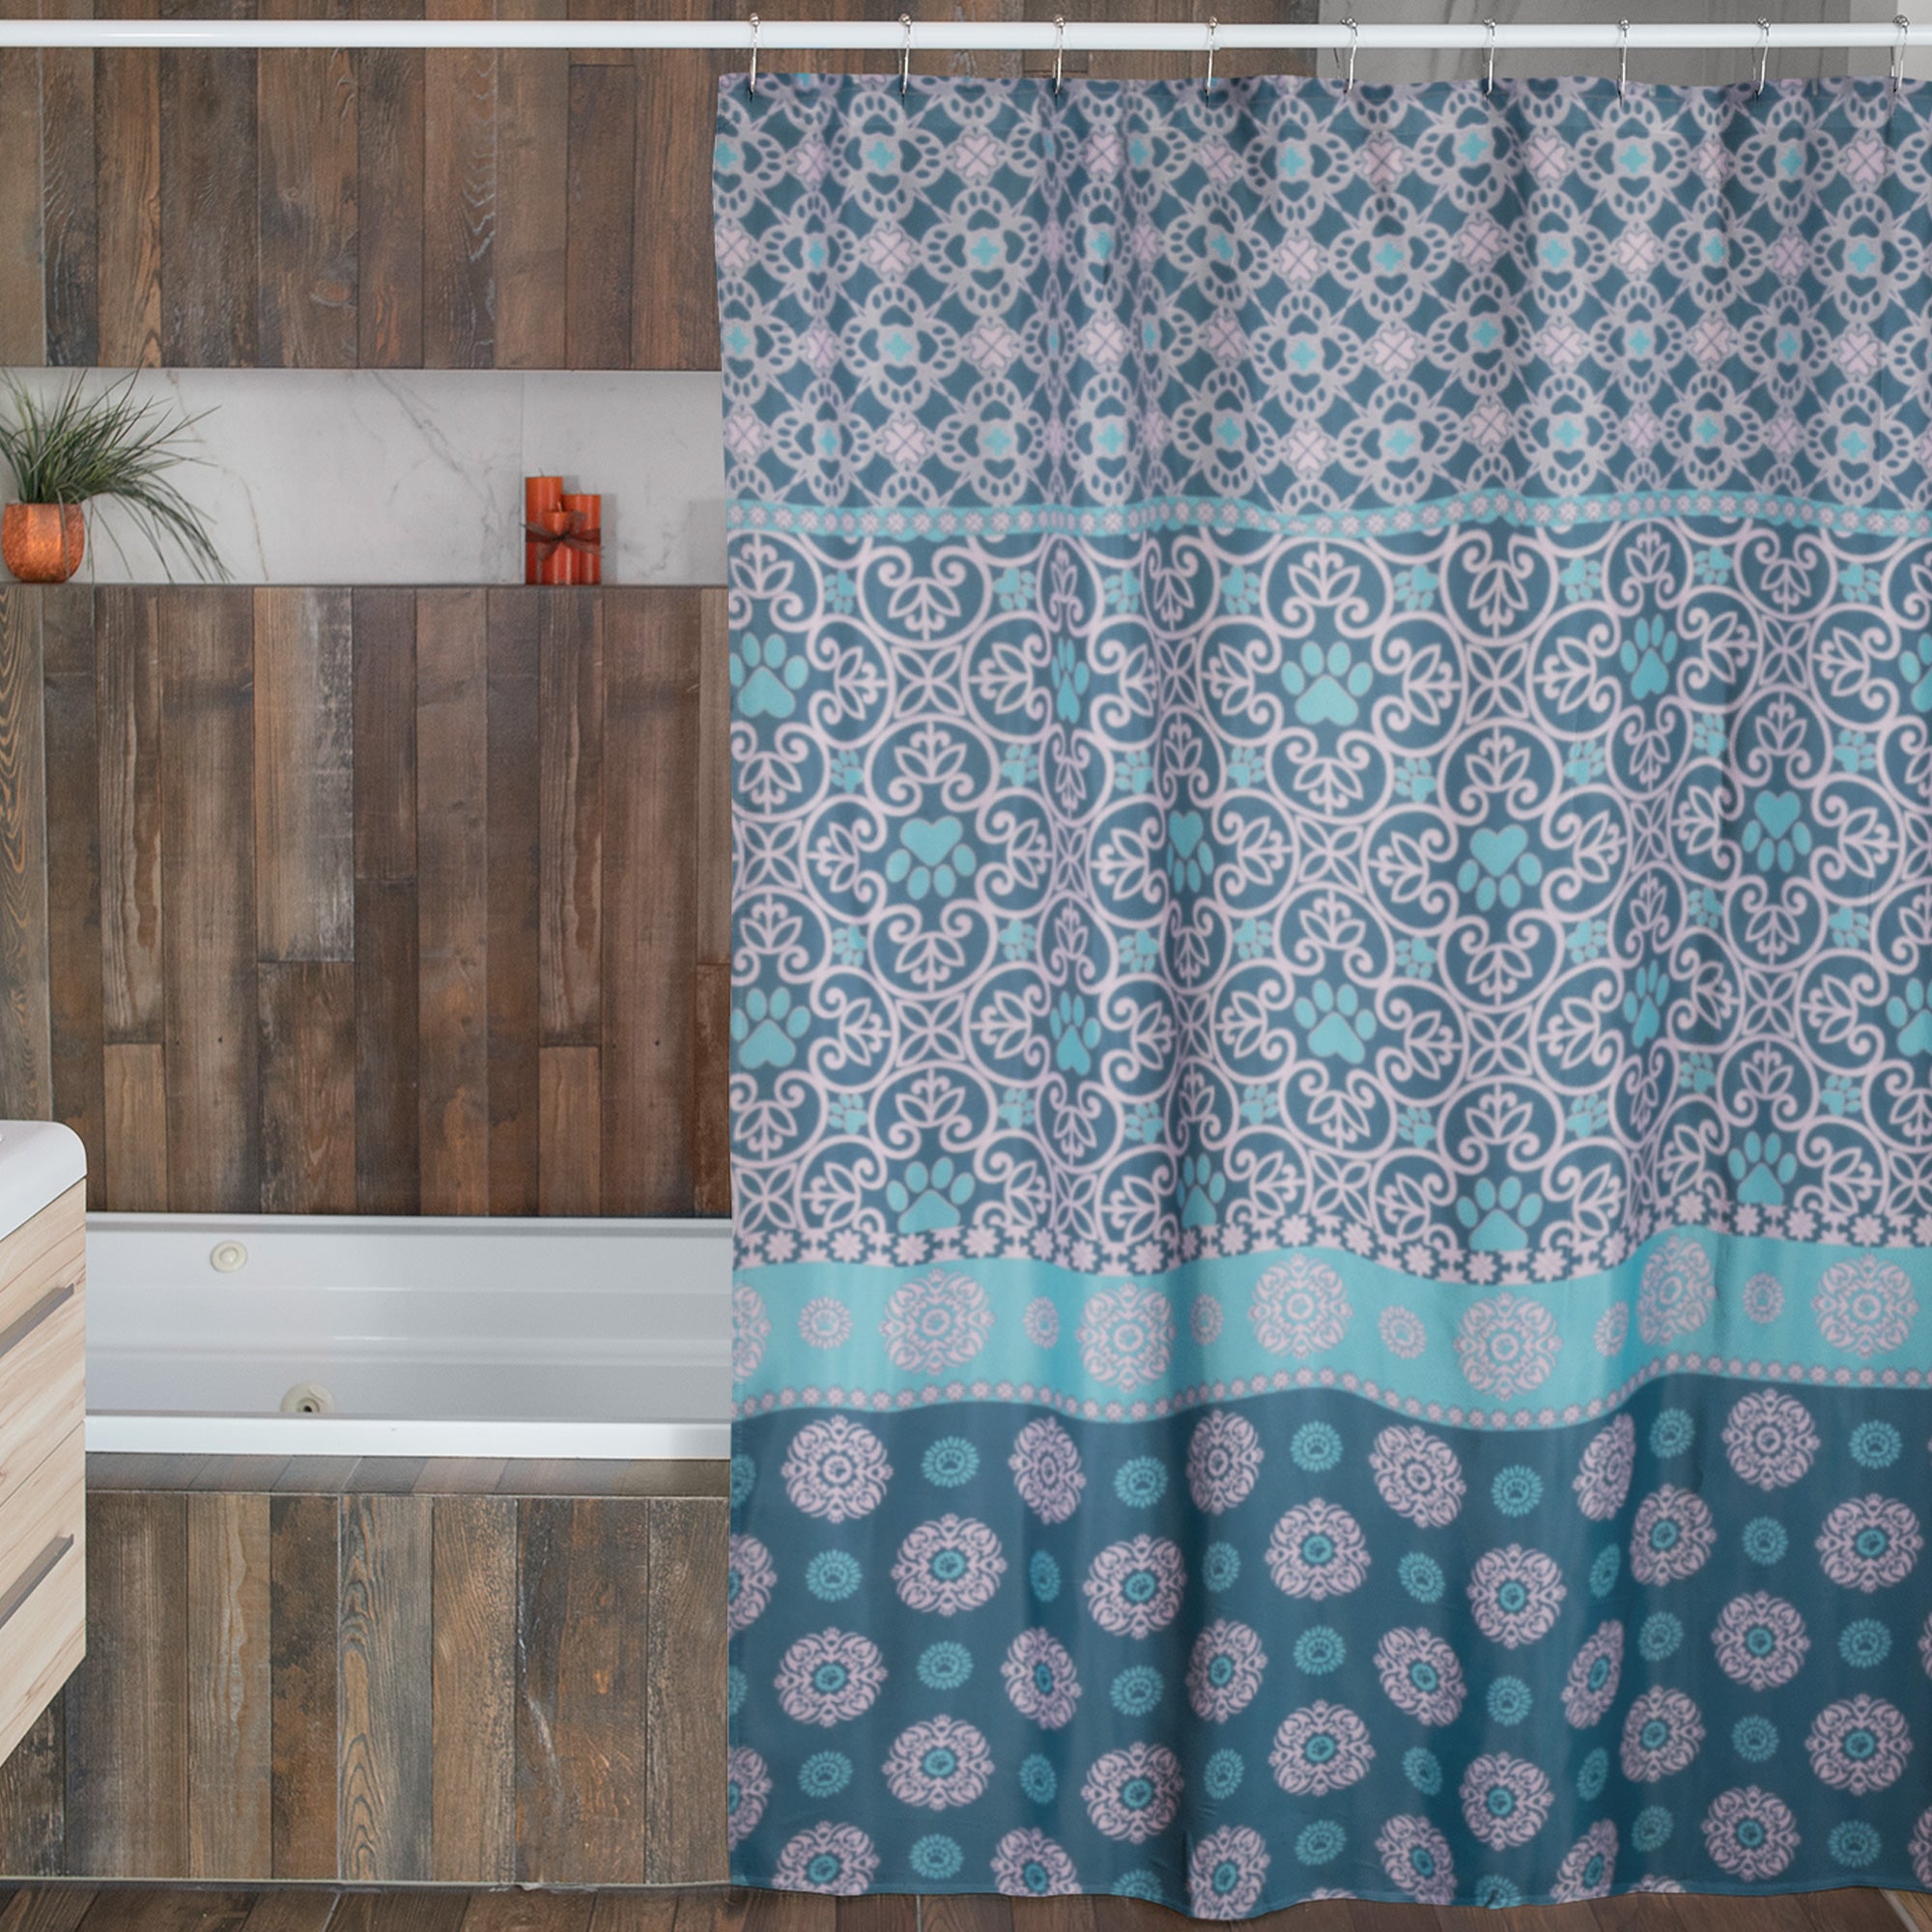 Pawsitively Pretty Shower Curtain - Perfectly Patterned Paws